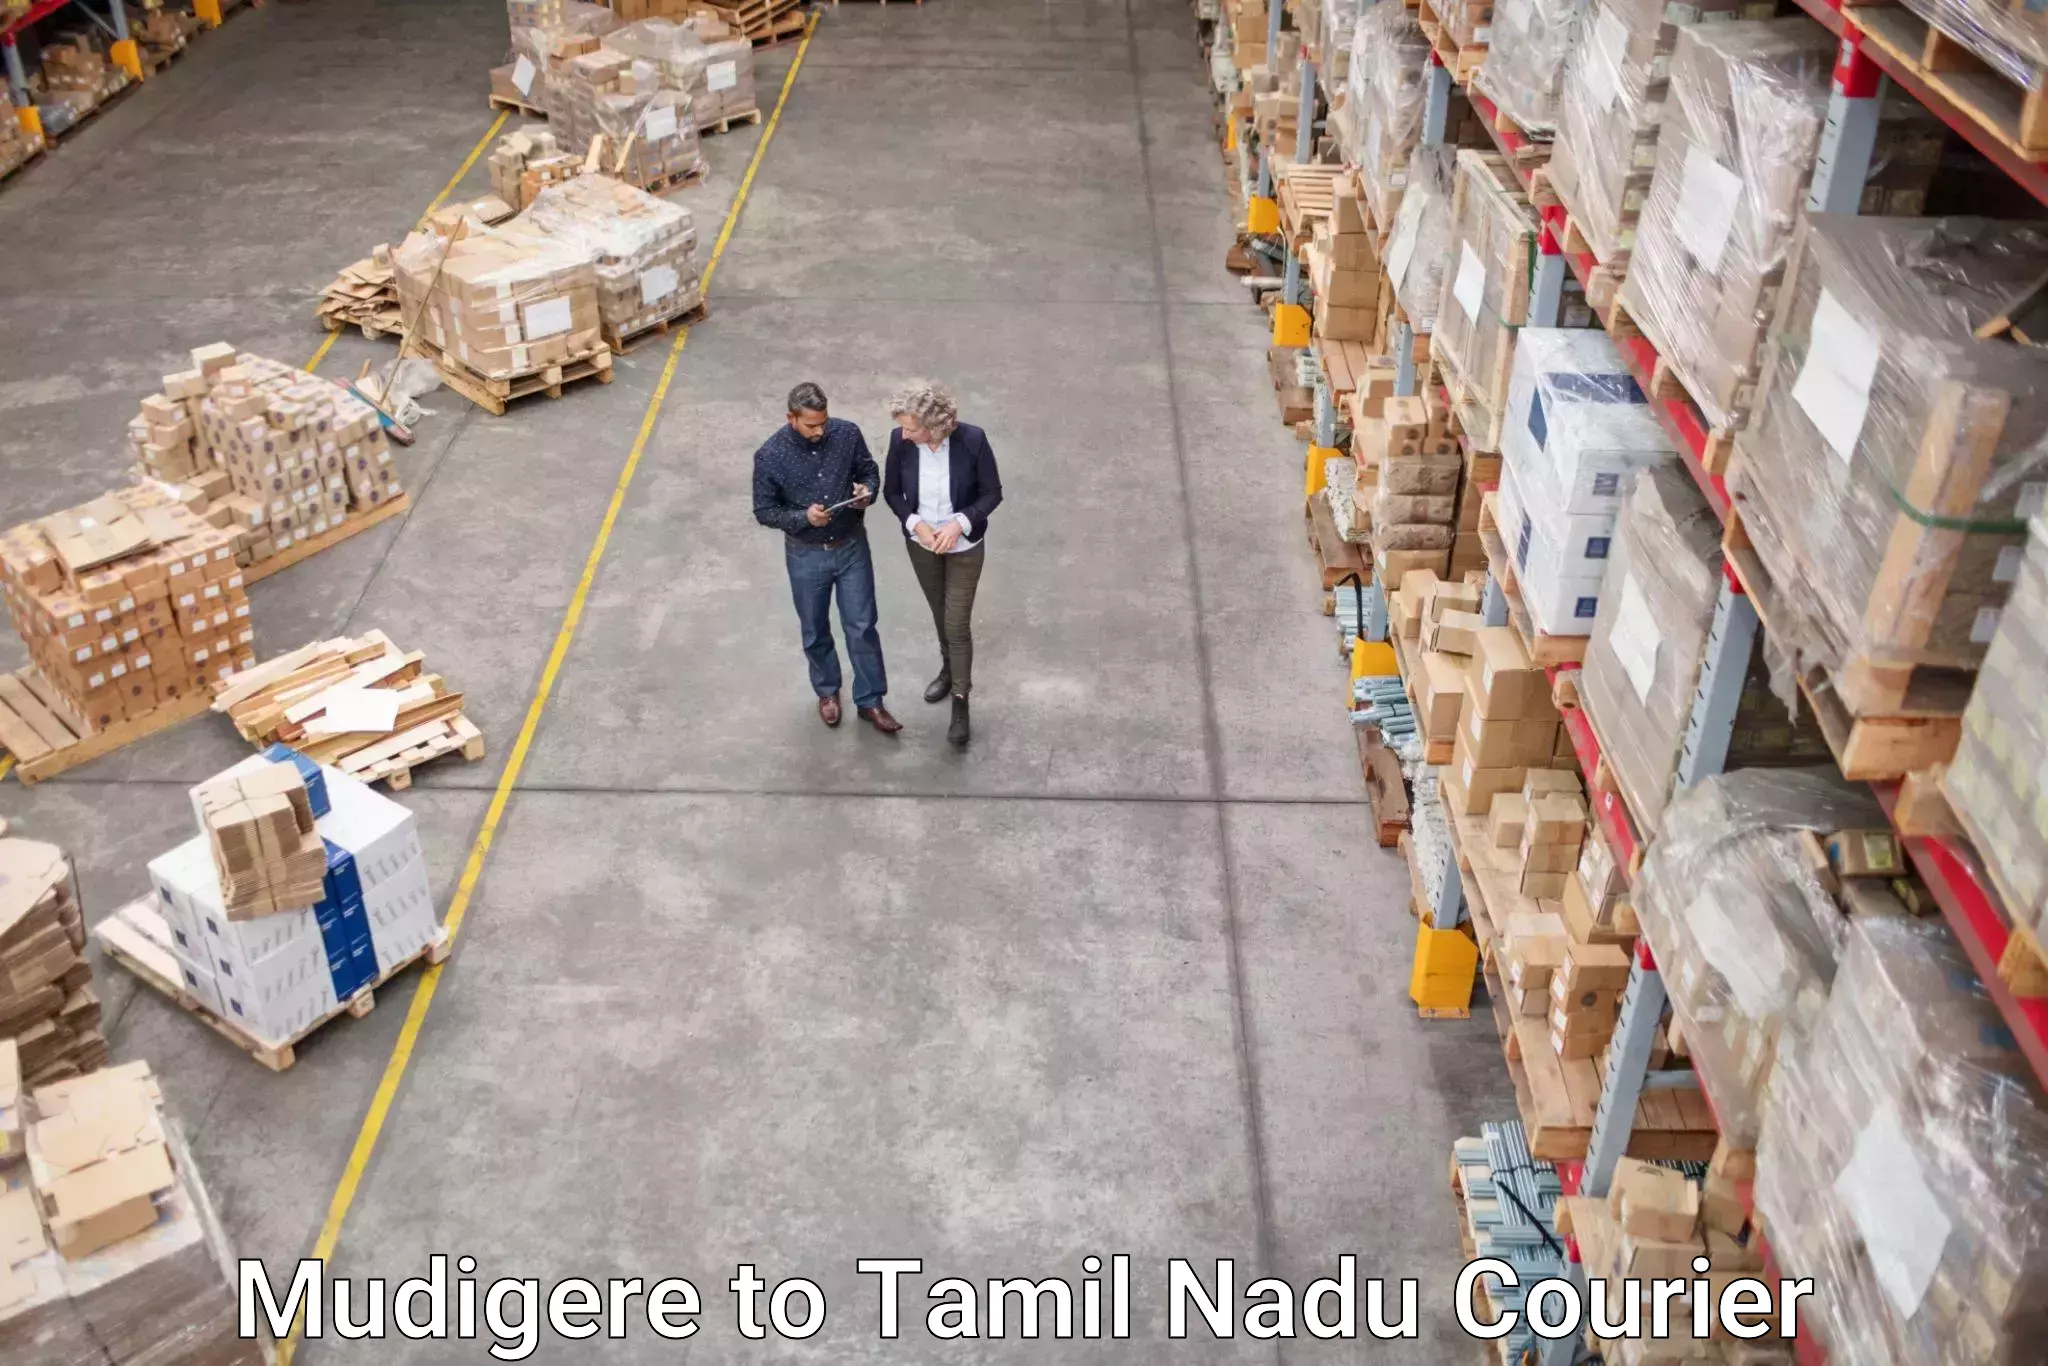 Easy access courier services Mudigere to Ennore Port Chennai